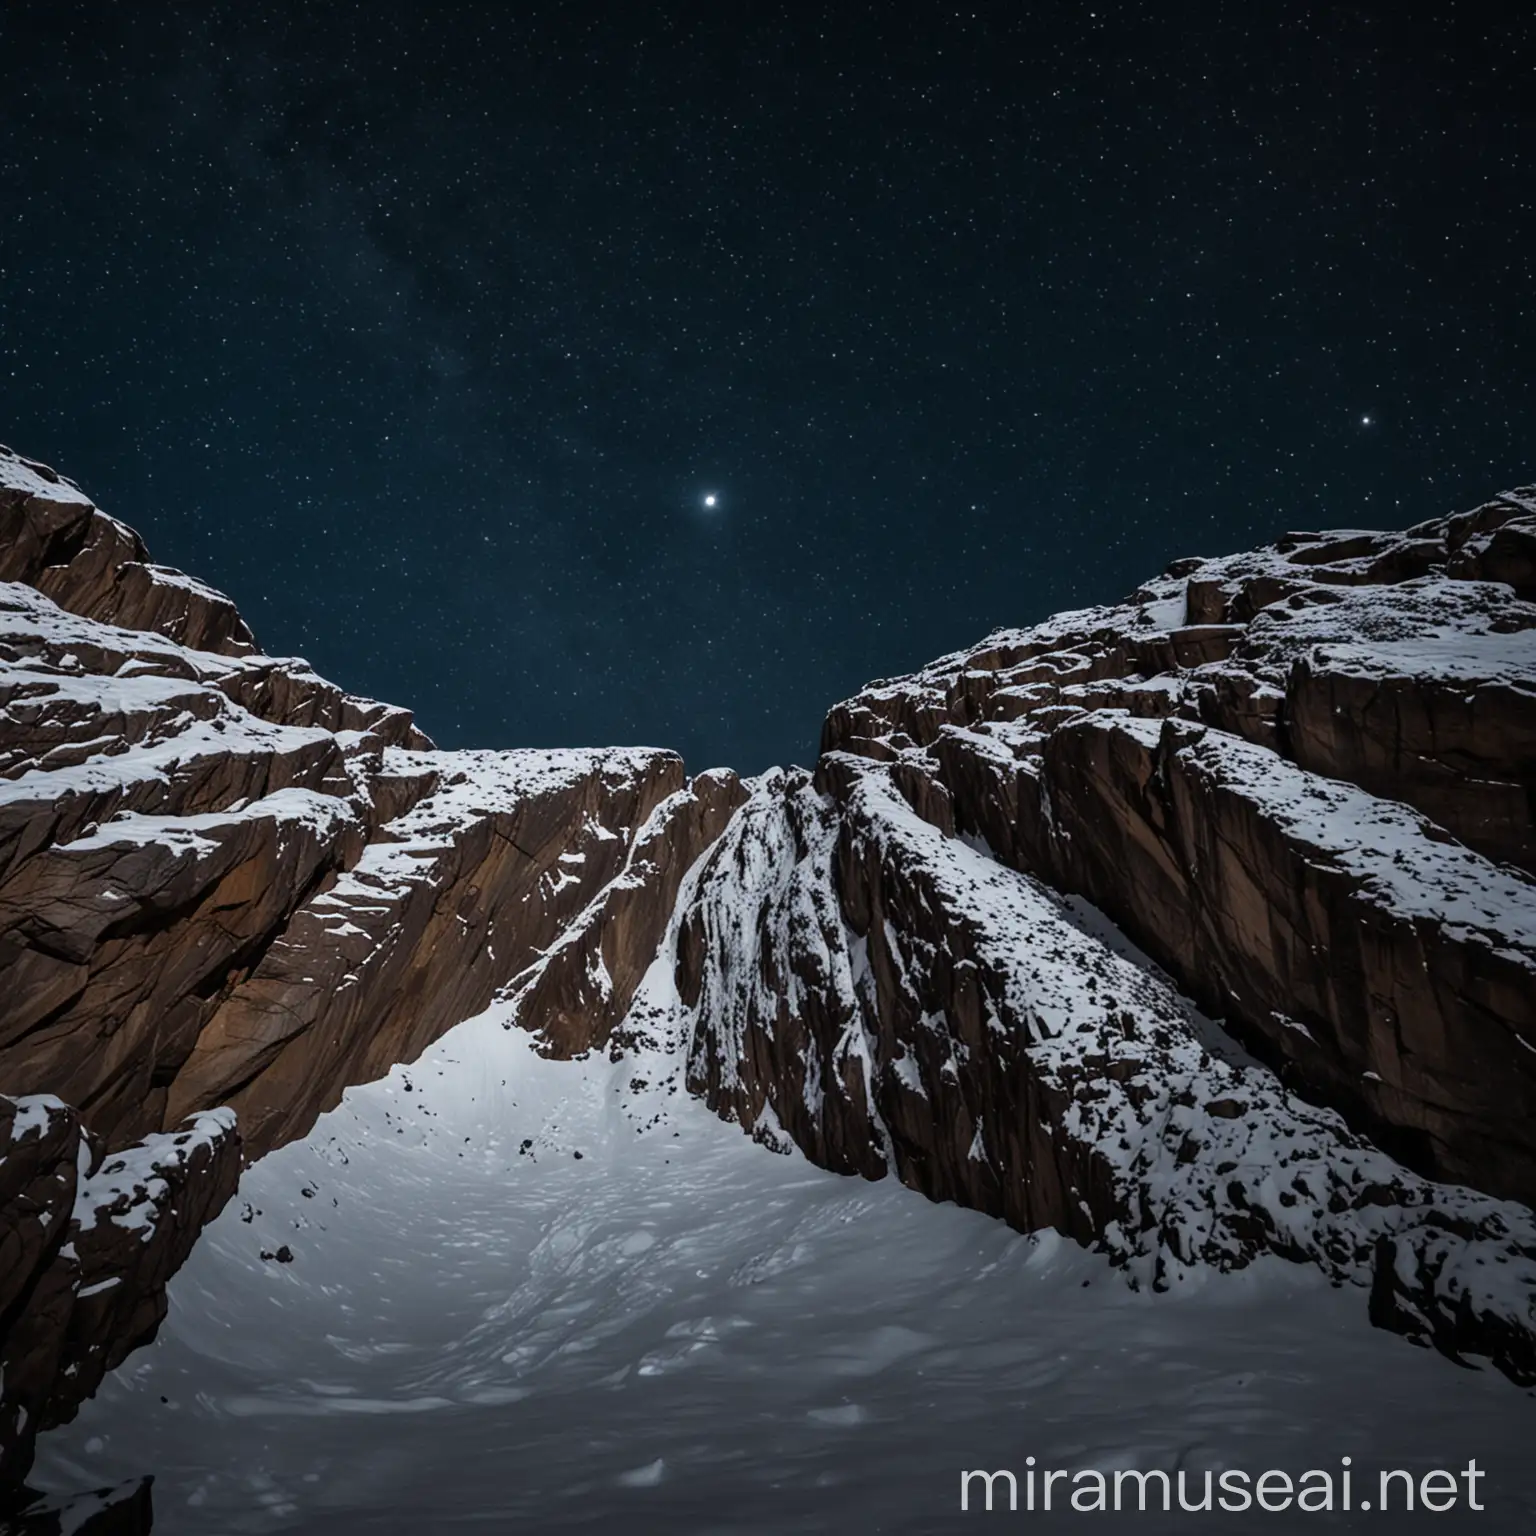 Snowy Rock Face at Night with Starry Sky